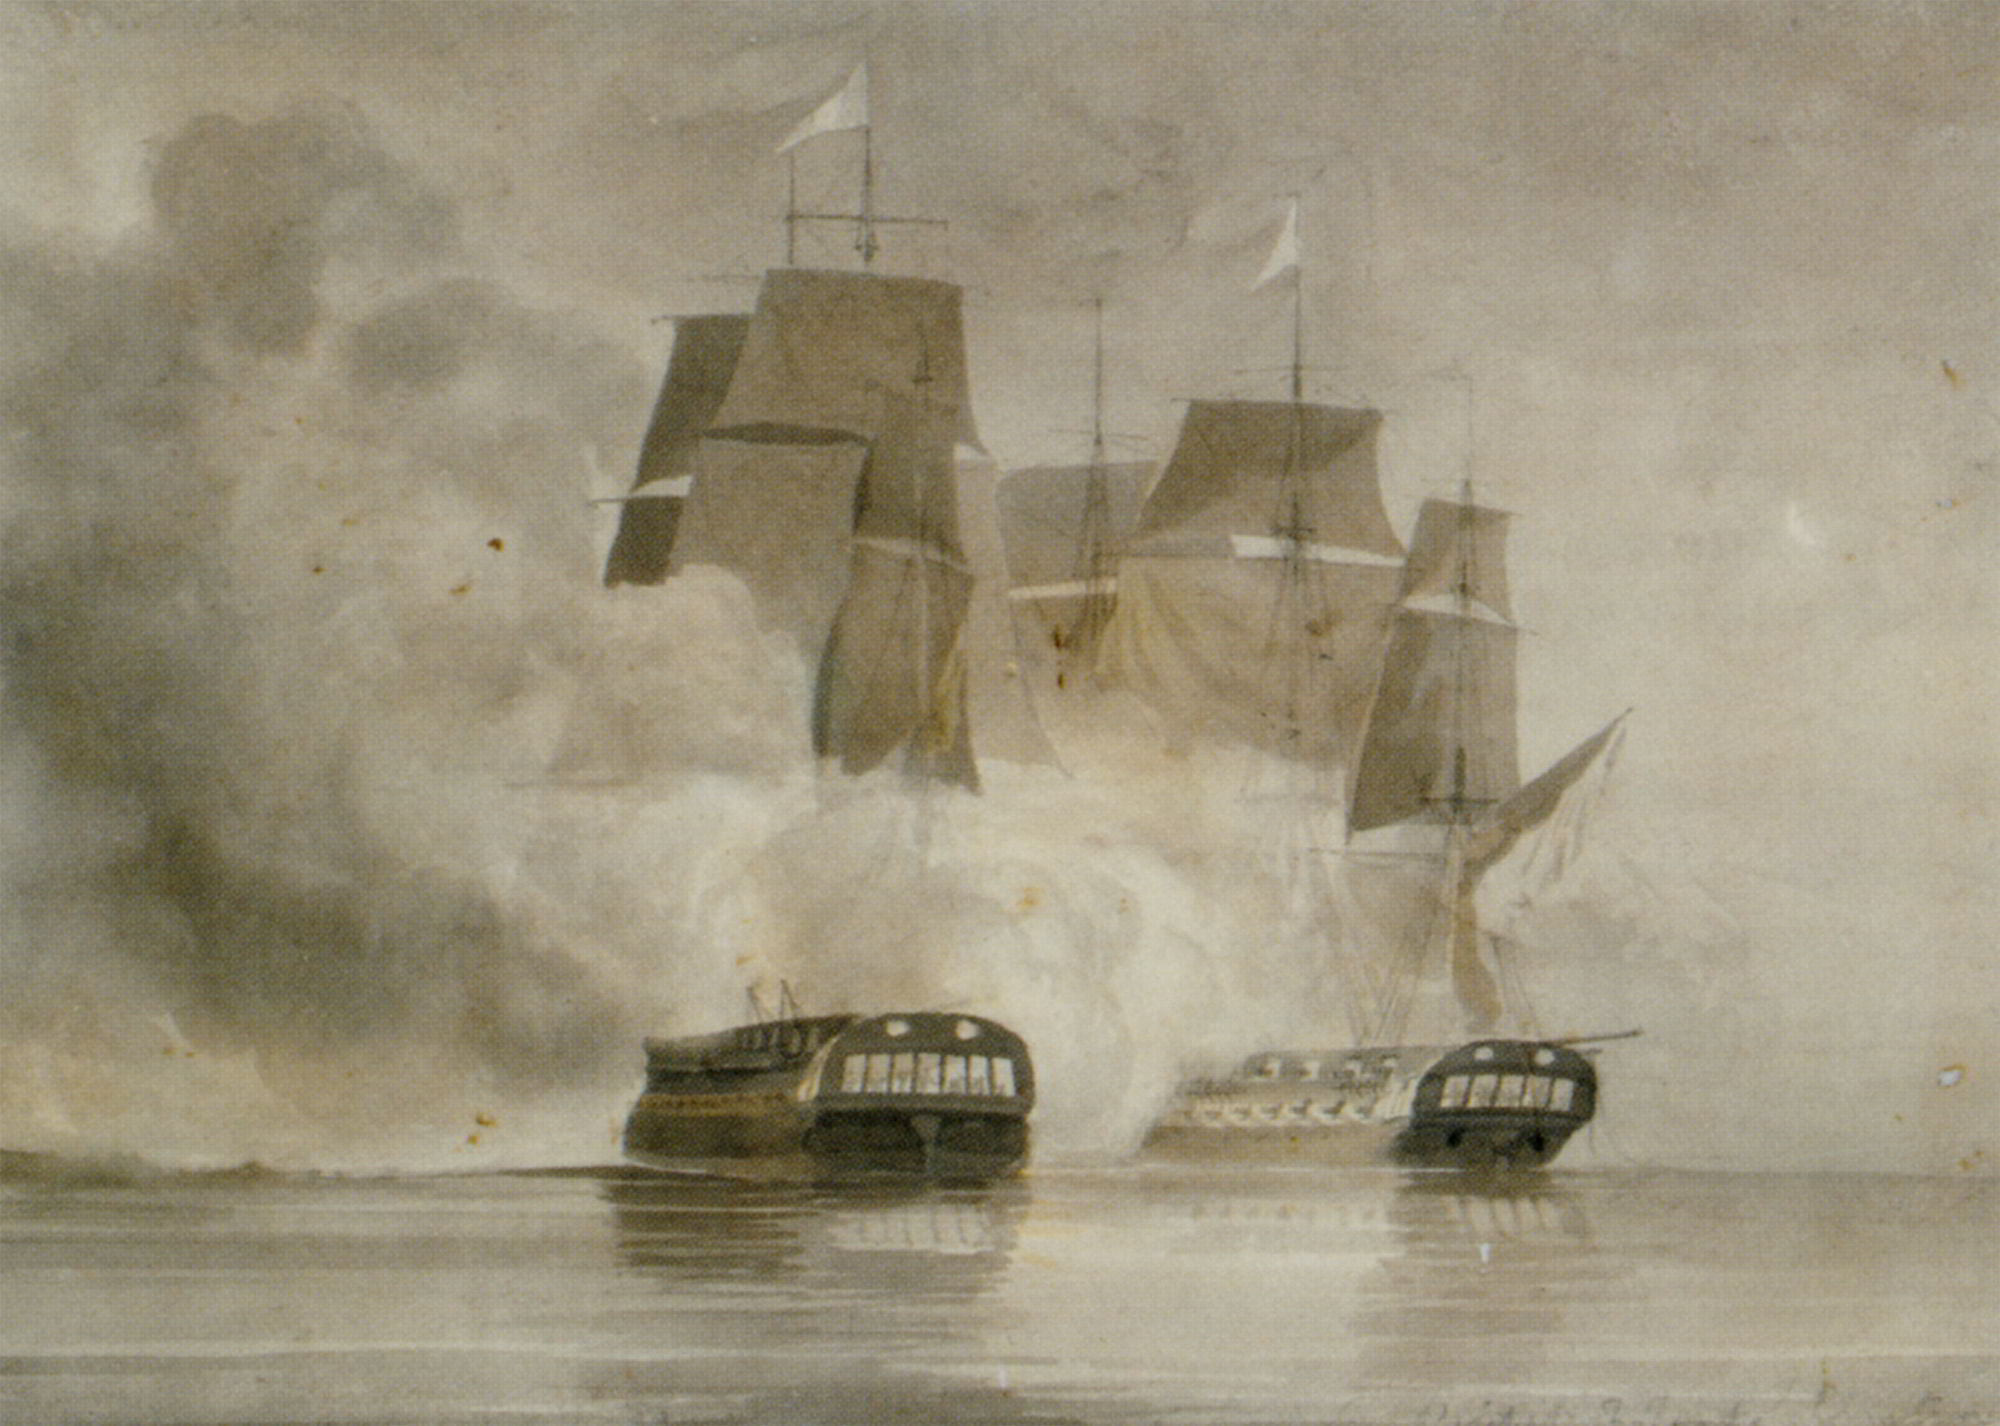 A drawn battle between the French frigate Arethuse and the British frigate Amelia by John Christian Schetky